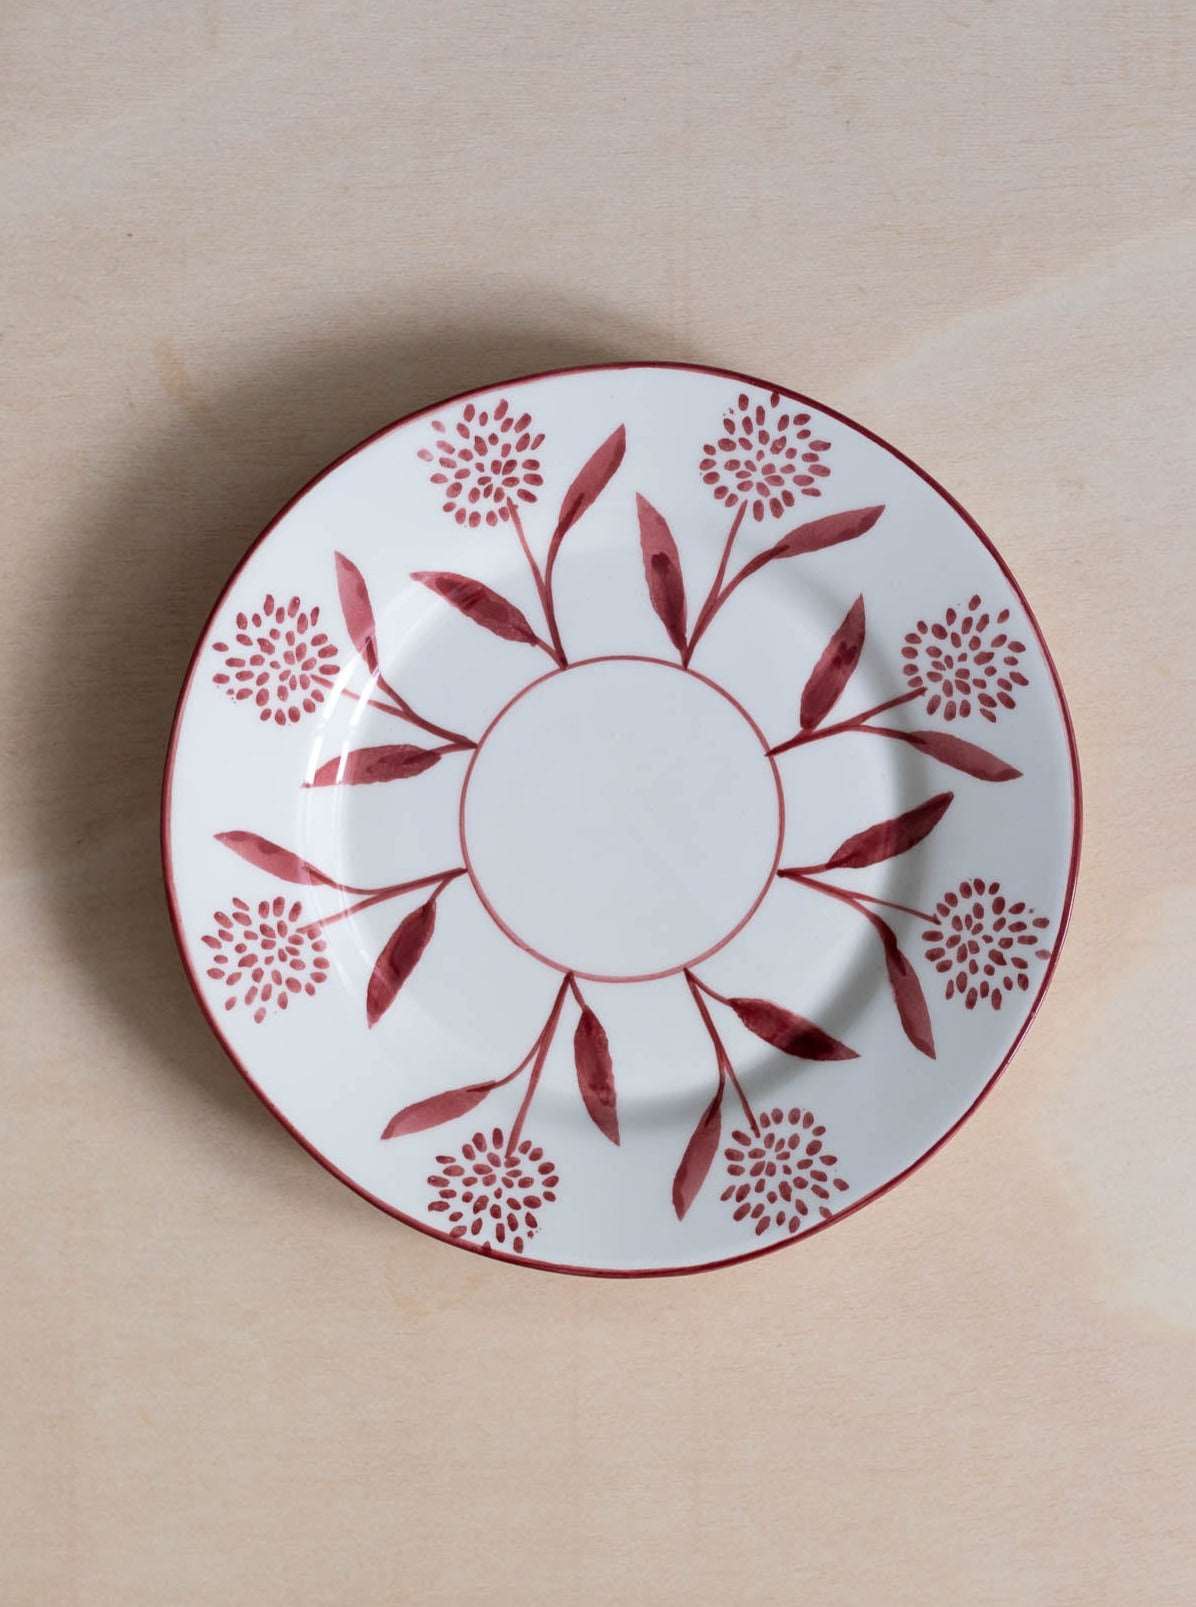 Cora Hand-Painted Ceramic Dessert Plate - Red and White - Front Image